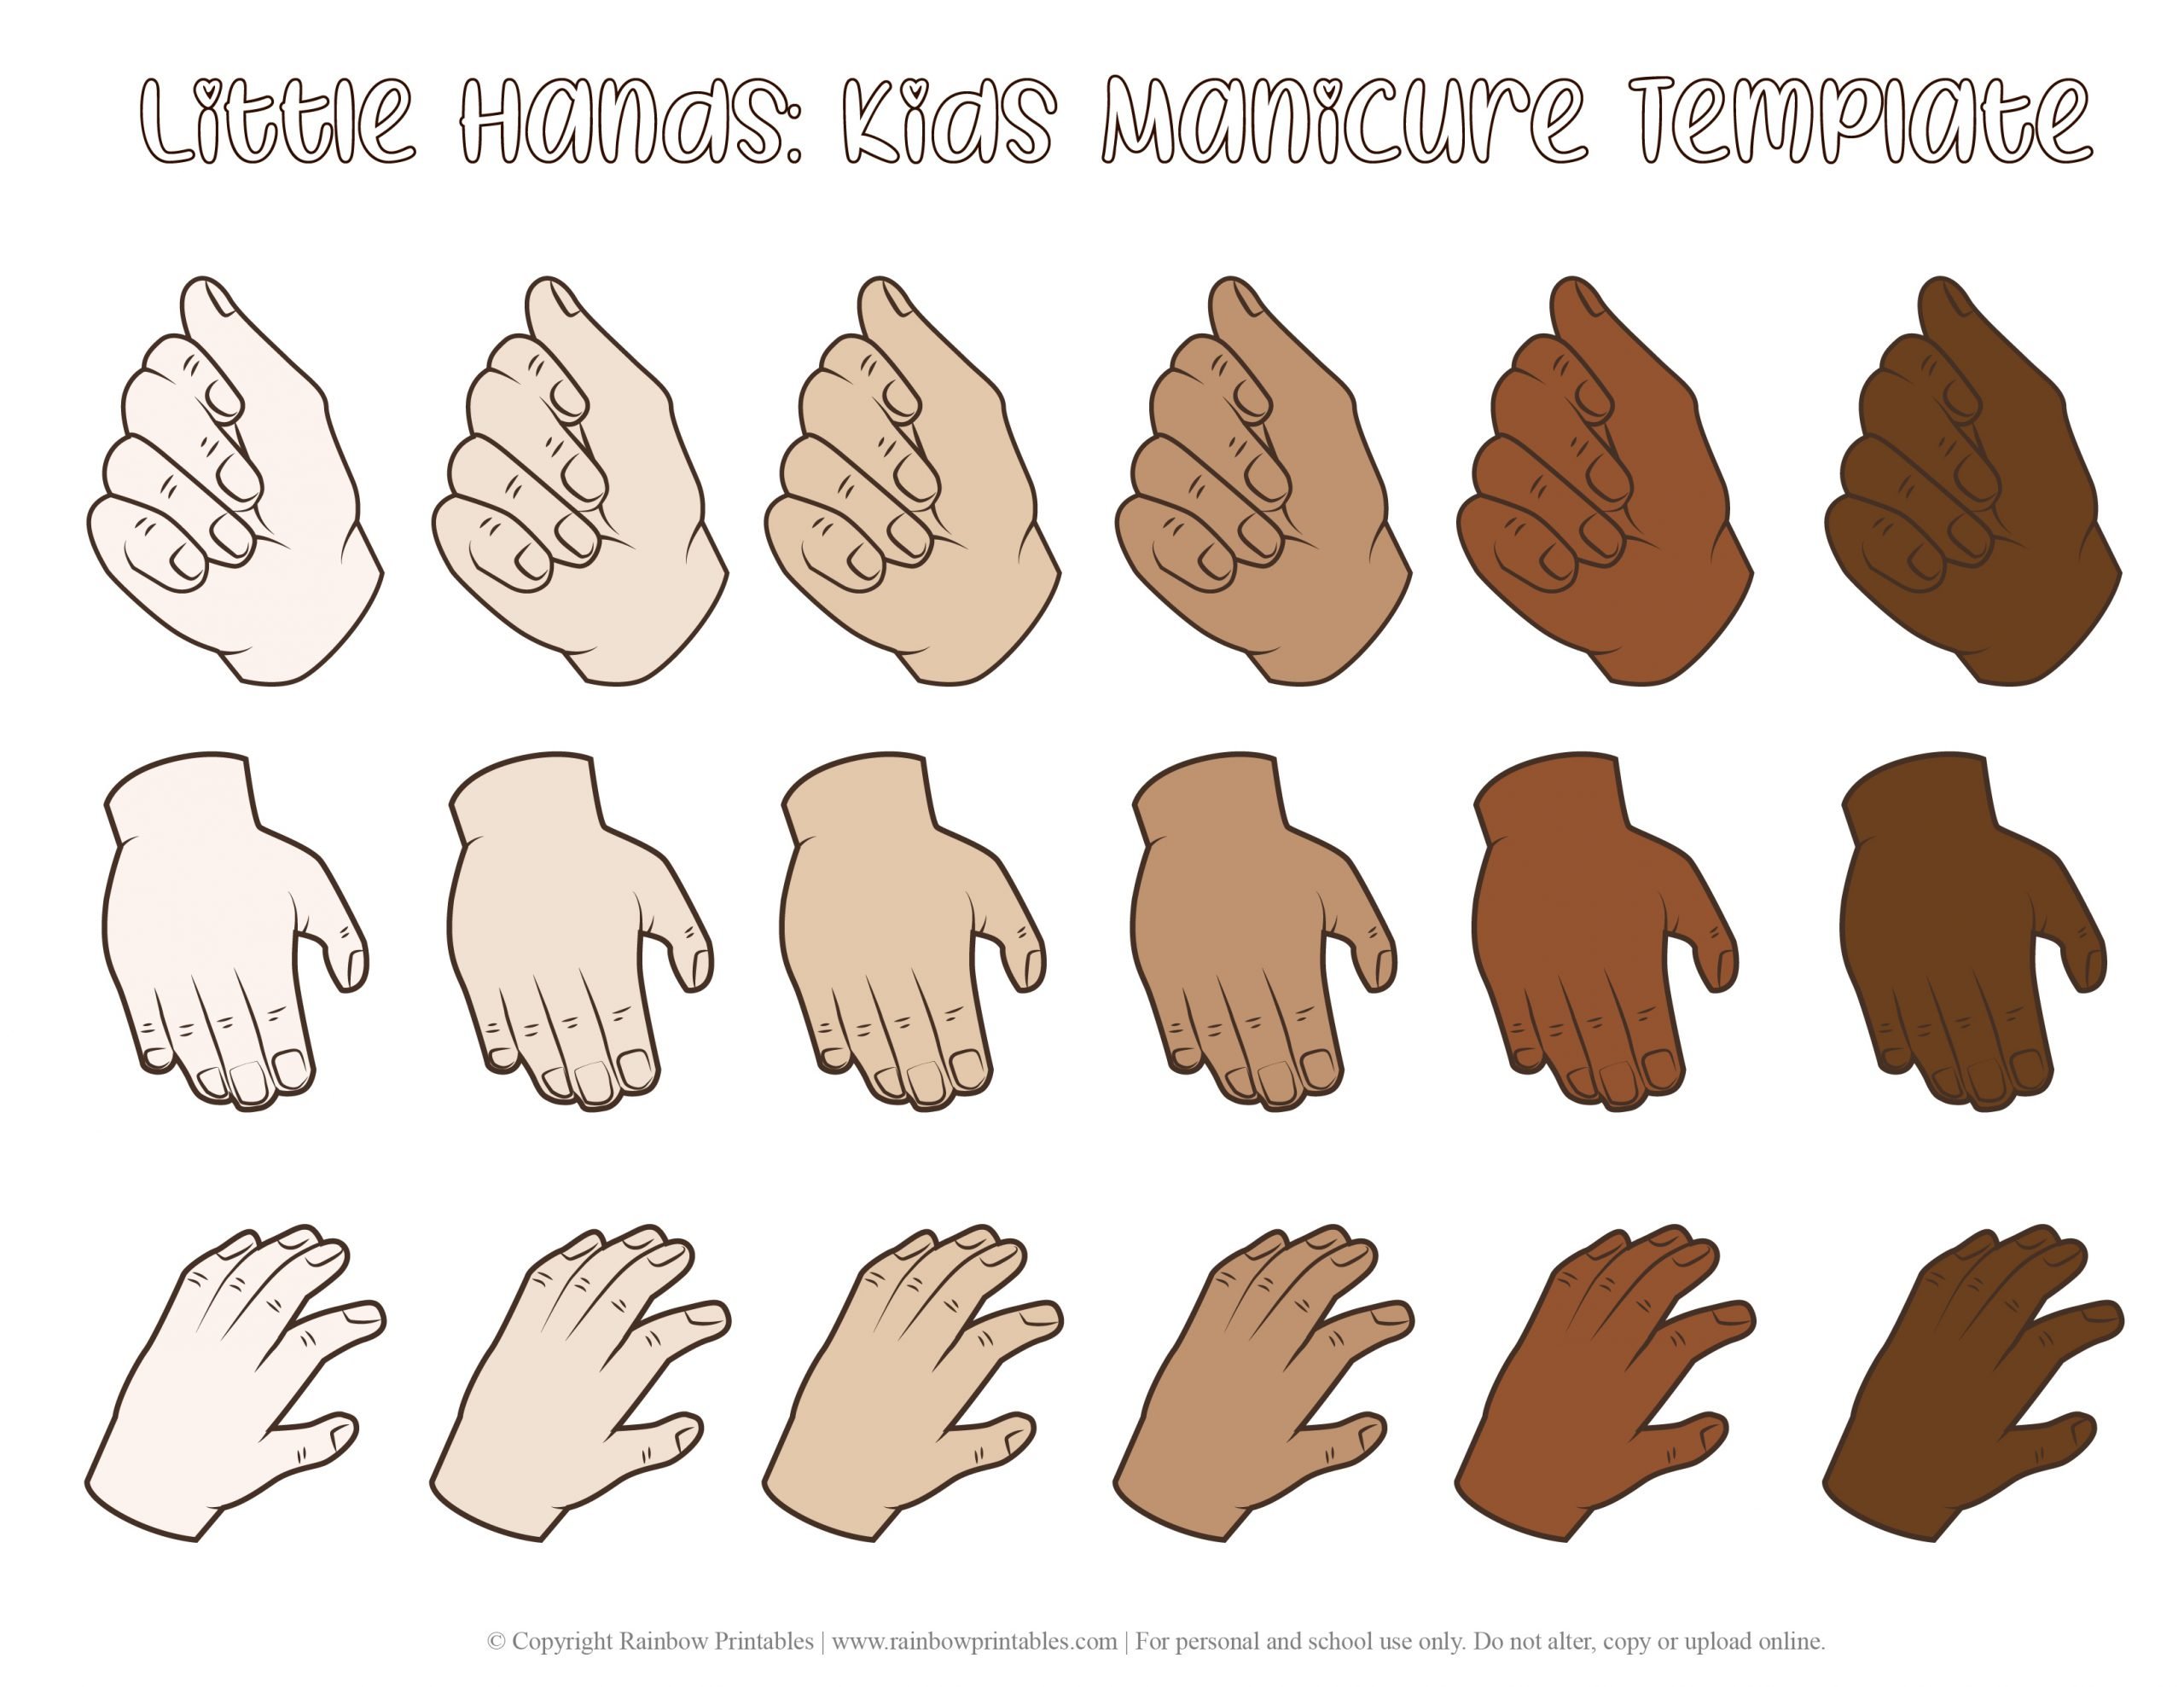 Beauty Arts & Crafts: Kid’s Manicure Nail Template – Free Printable With Realistic Skintones